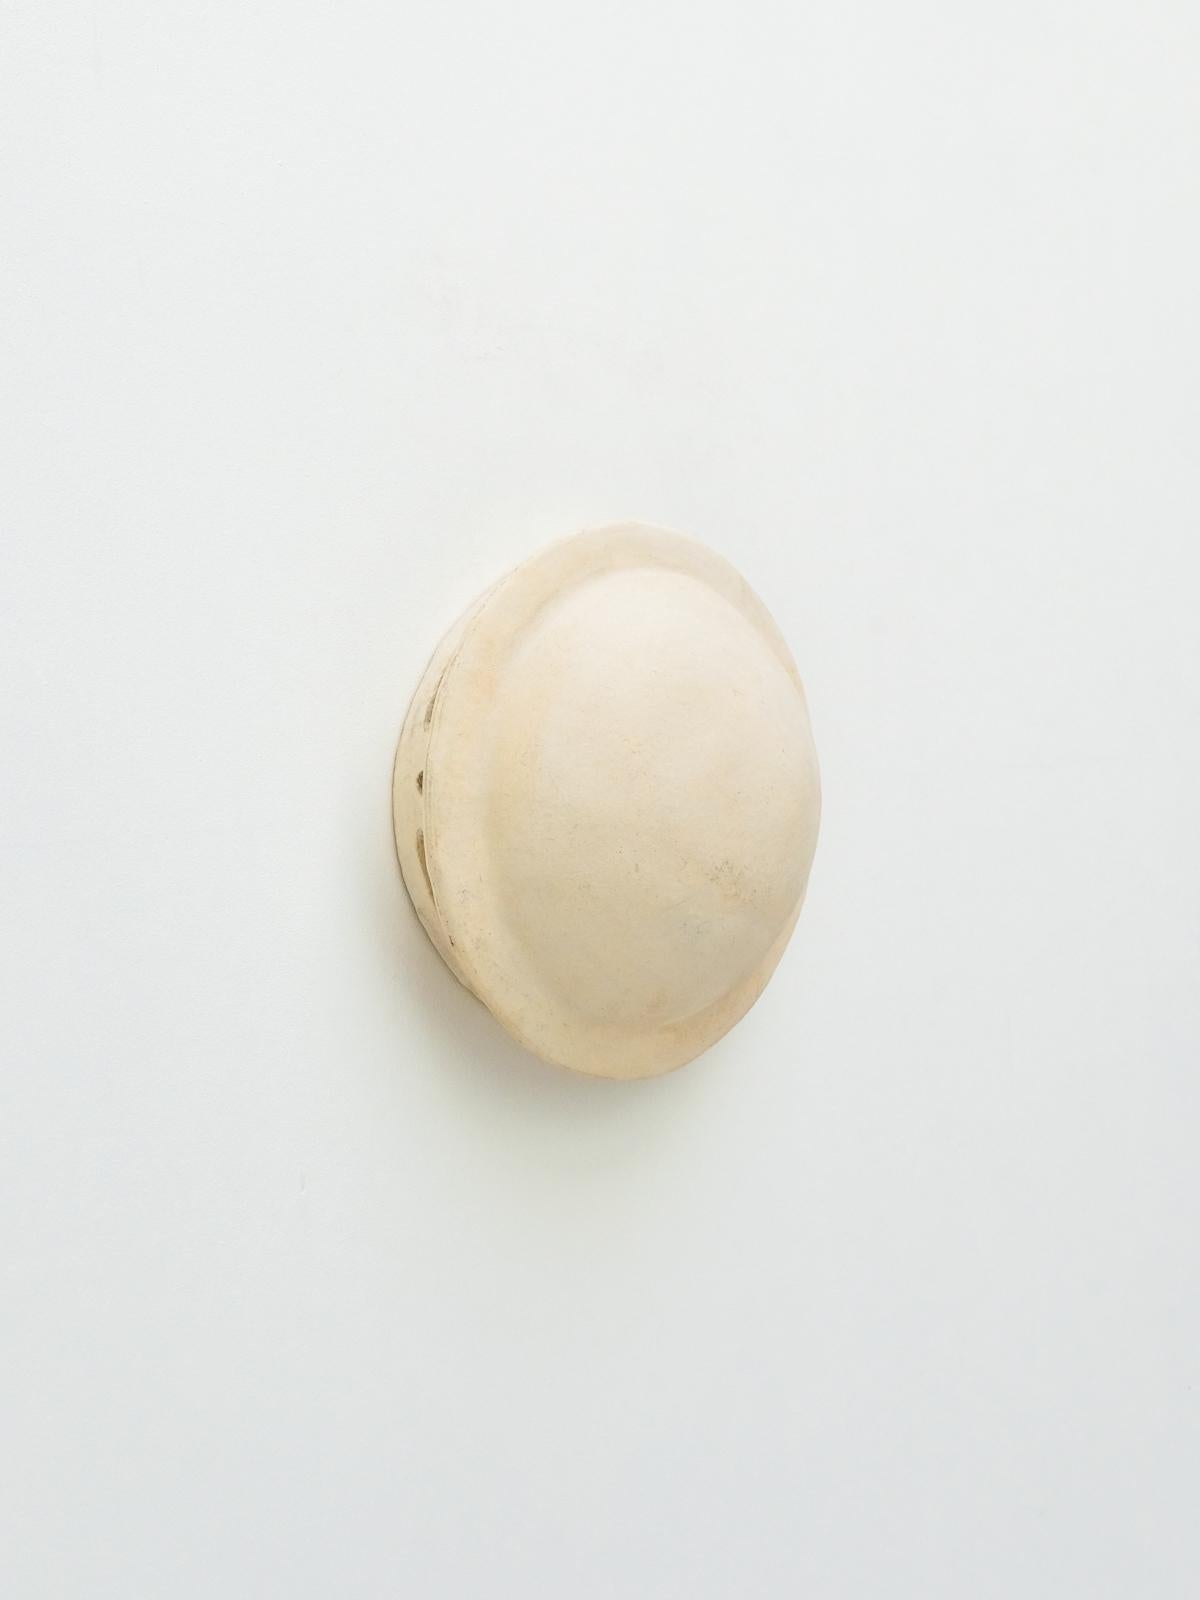 Hand-Crafted White contemporary Ceramic Wall Light Made of local Clay by memòri studio For Sale